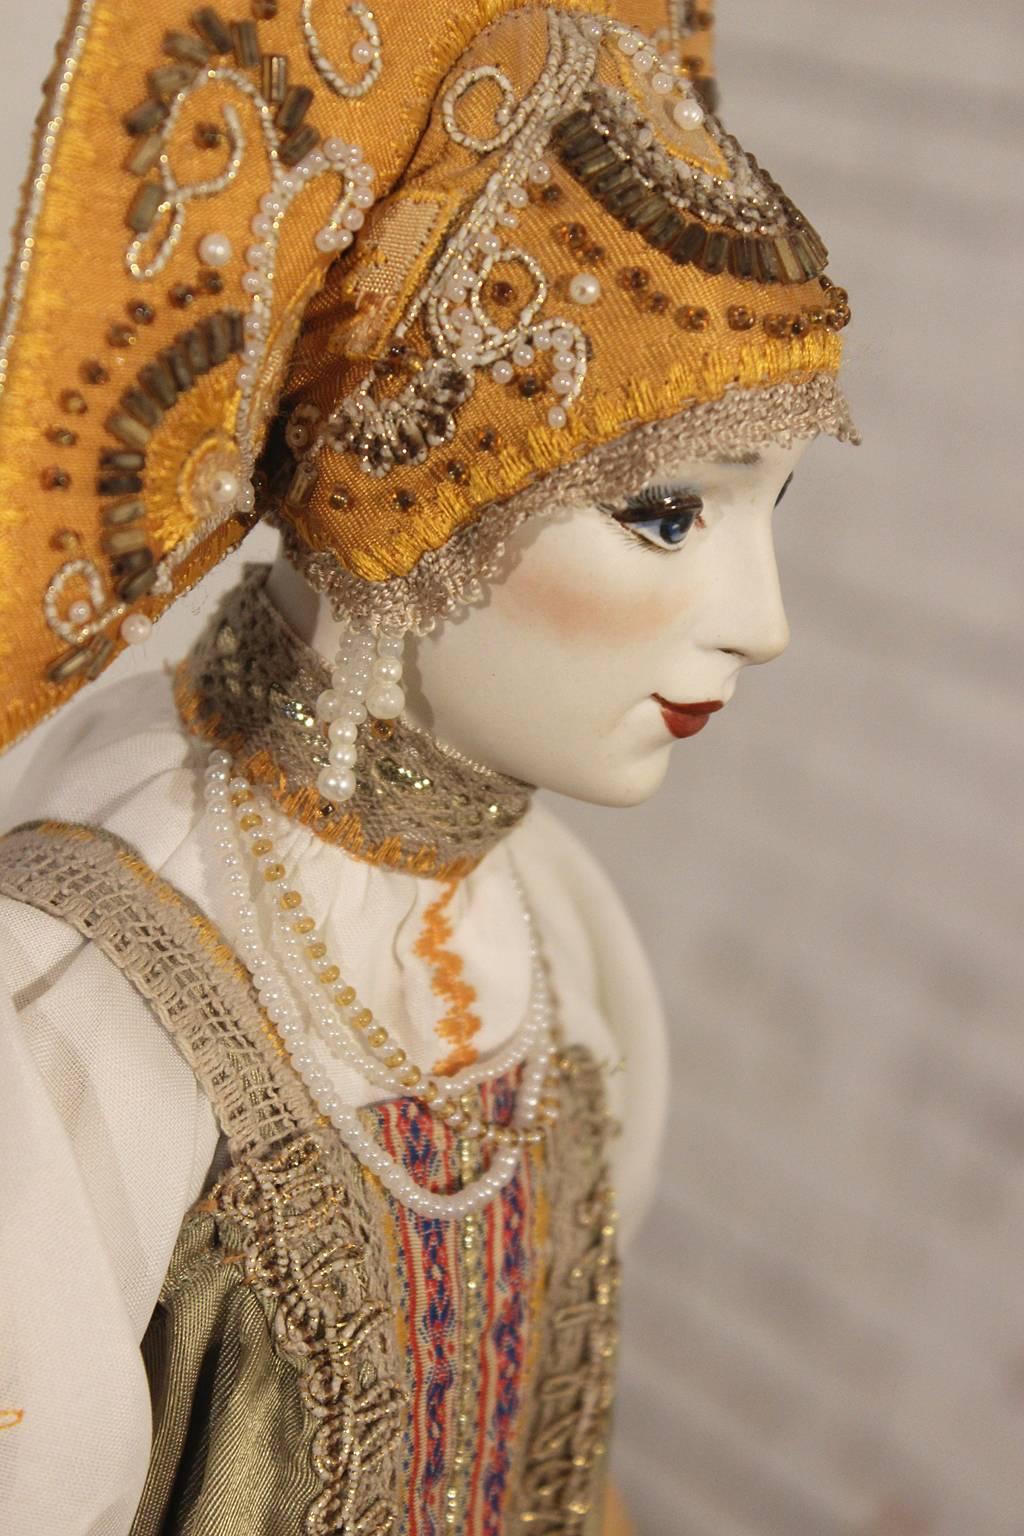 This Russian folk costume doll is a beautiful piece of Russian art in excellent condition.

What a beauty! There is no signature on her but through research we feel she must be made by Elena Pelevina or Natalia Vlasova. She is dressed in a very